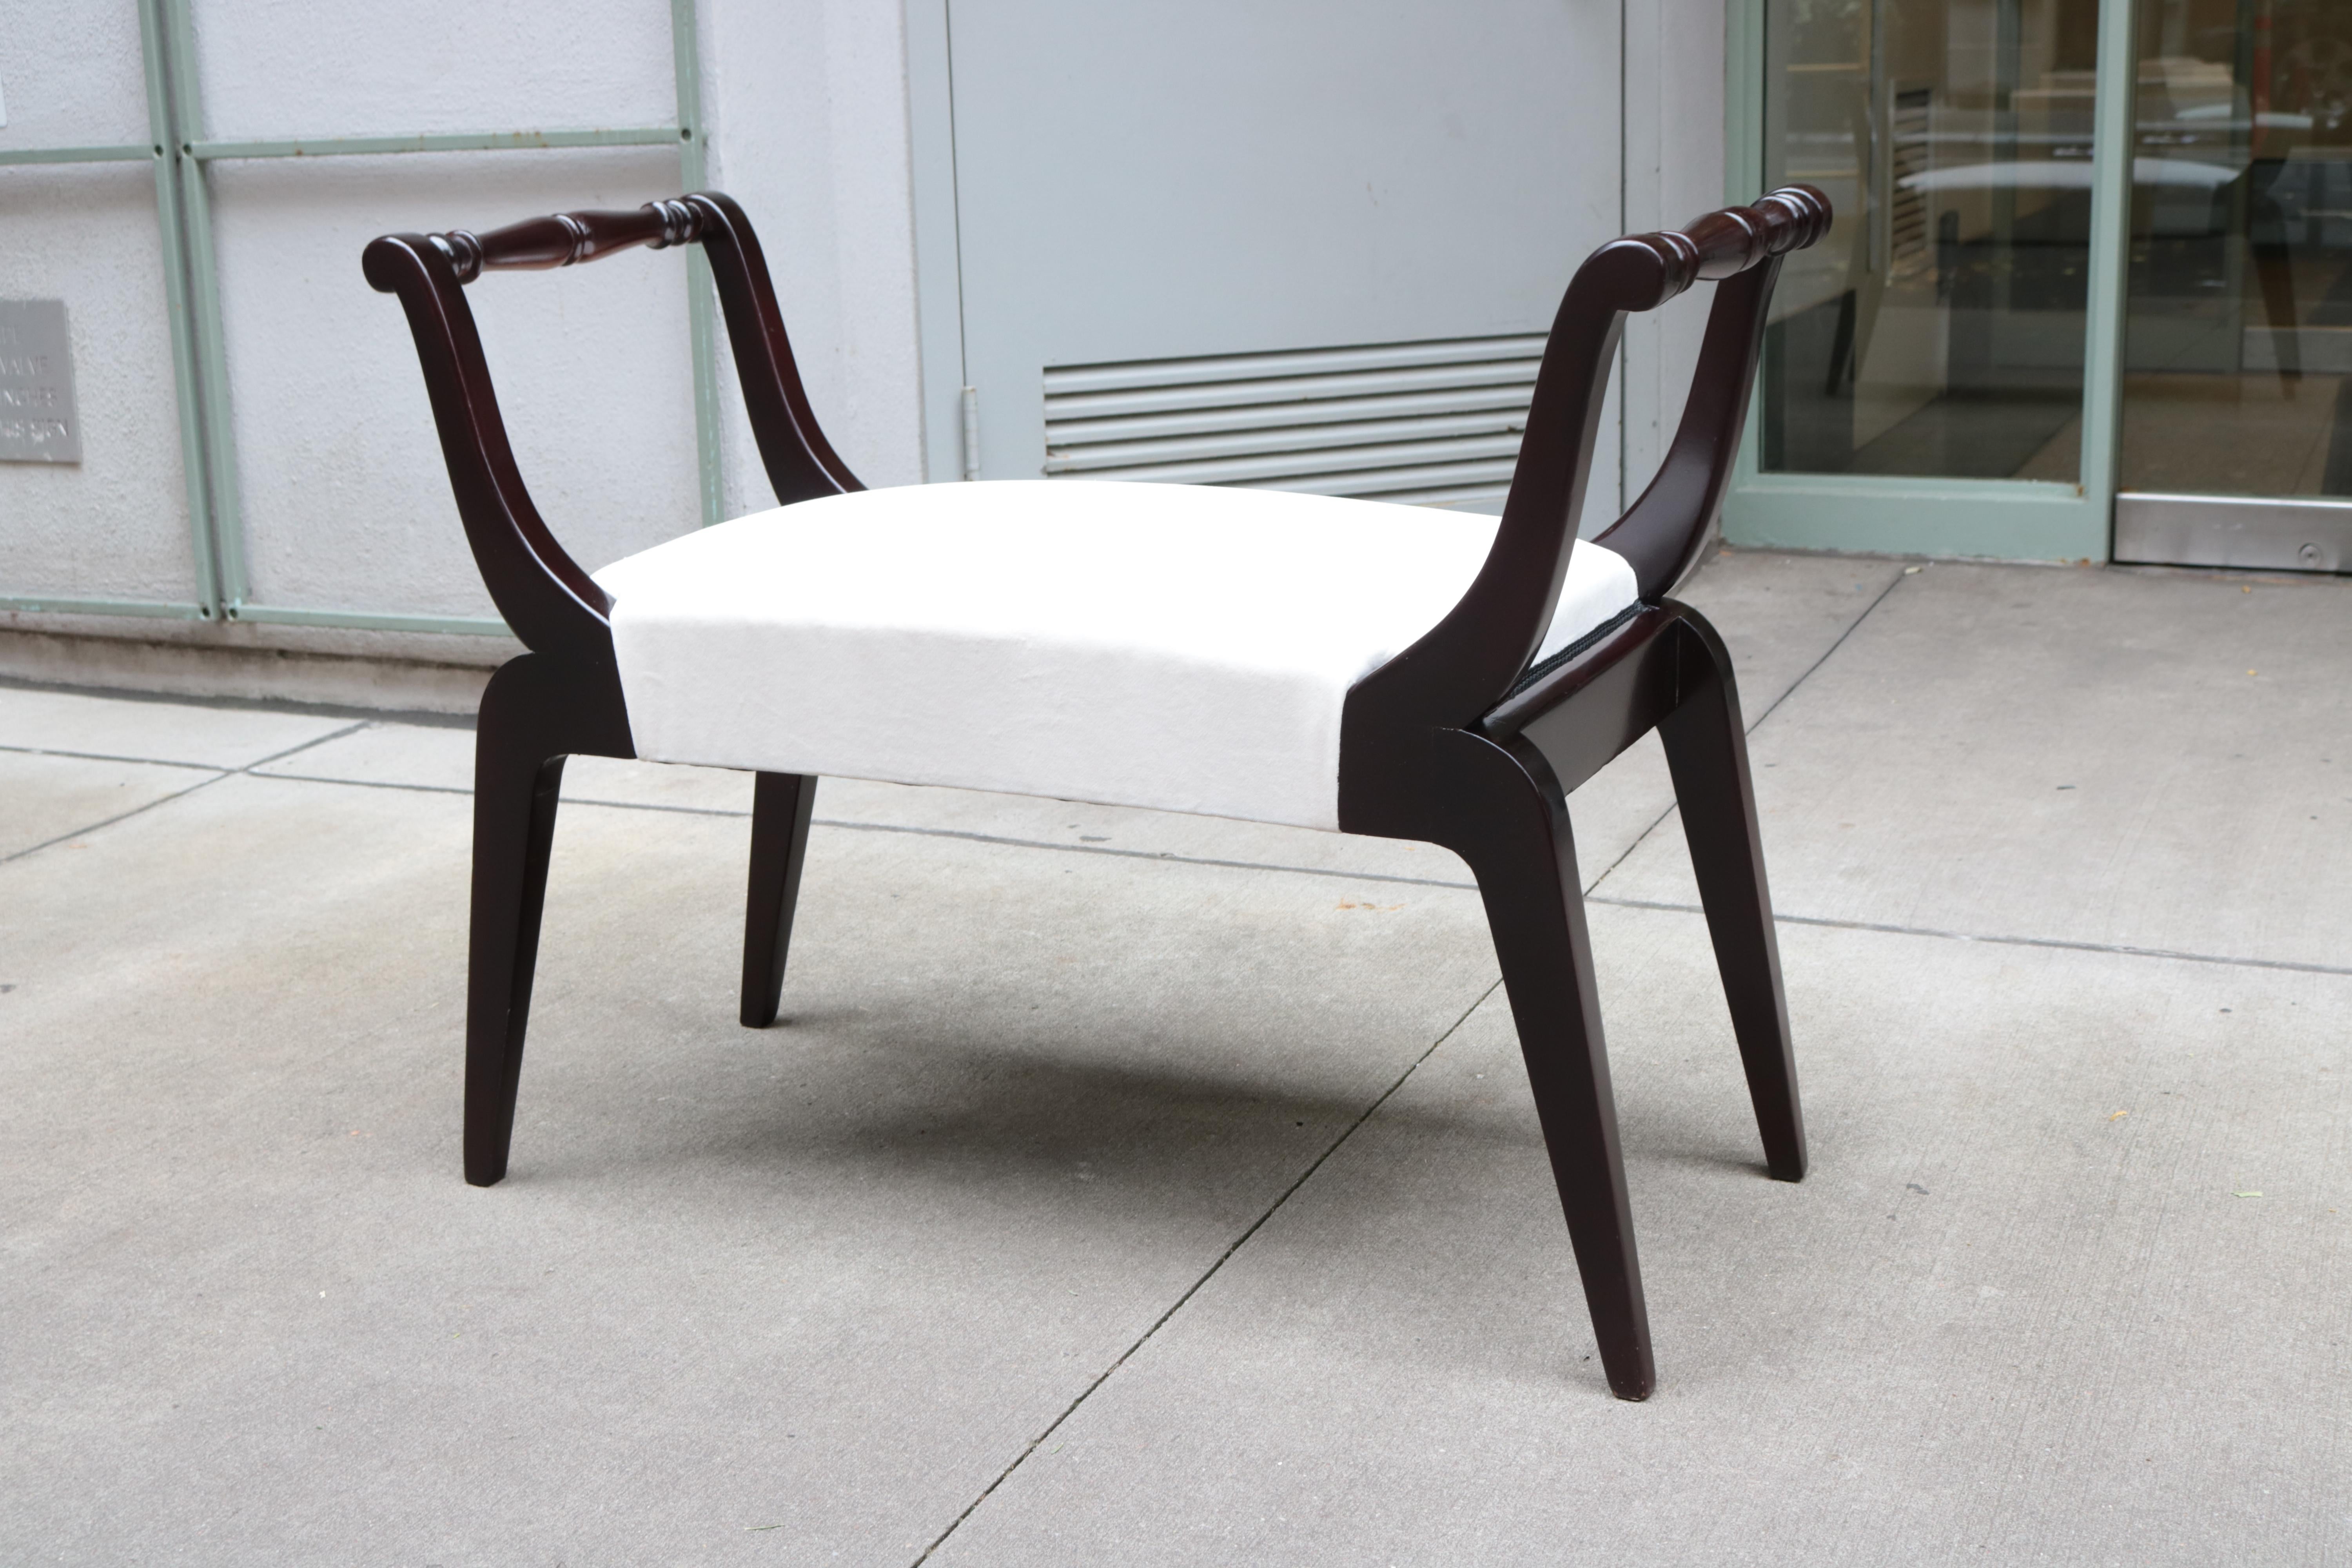 An ebonized Italian Mid Century bench.
Ebonized Beech wood with tapered legs and 
carved detaials on the armrests.